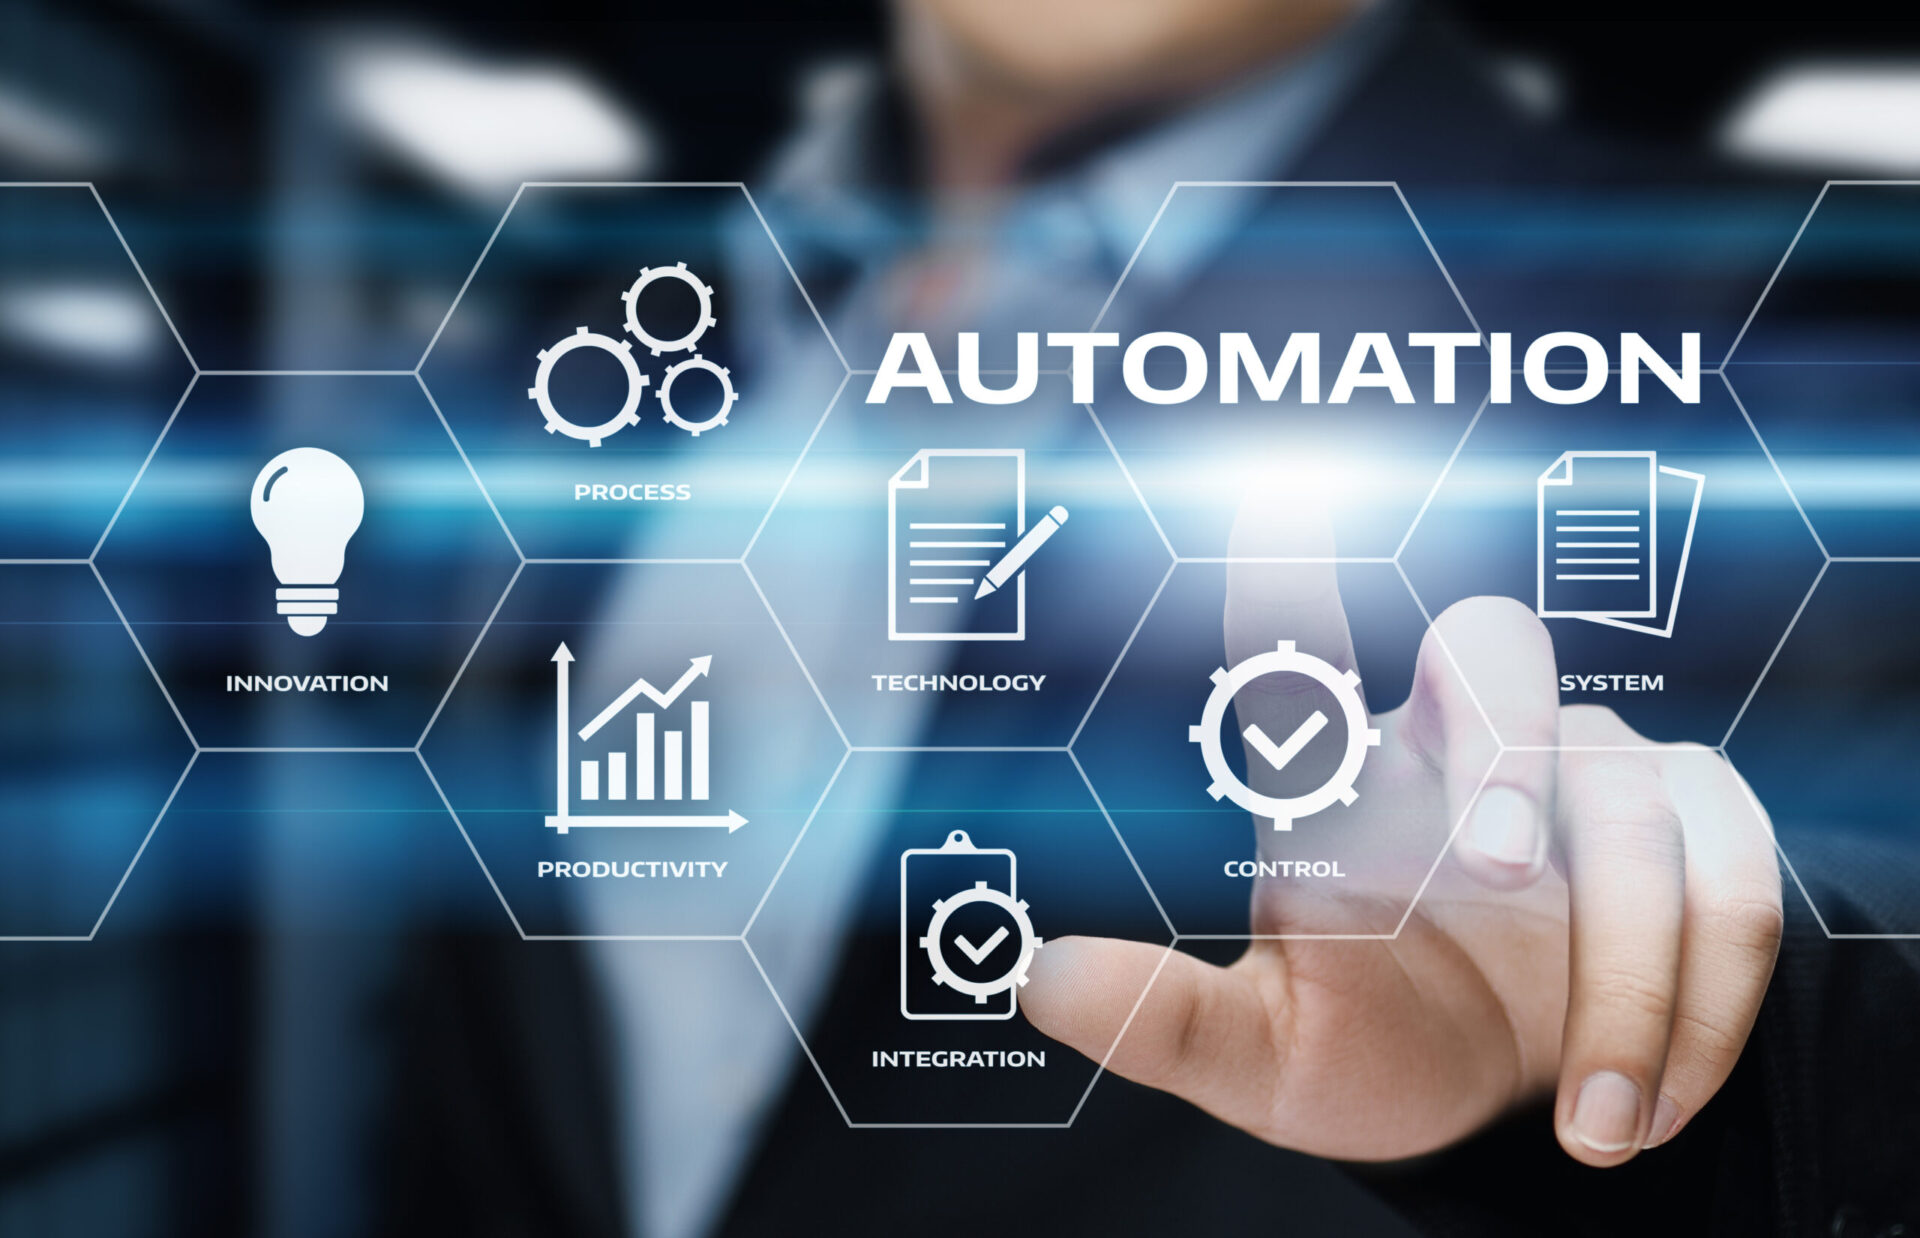 Distribution Automation Solutions Market Report, Demand, Scope, Global Opportunities, Challenges and key Players by 2032